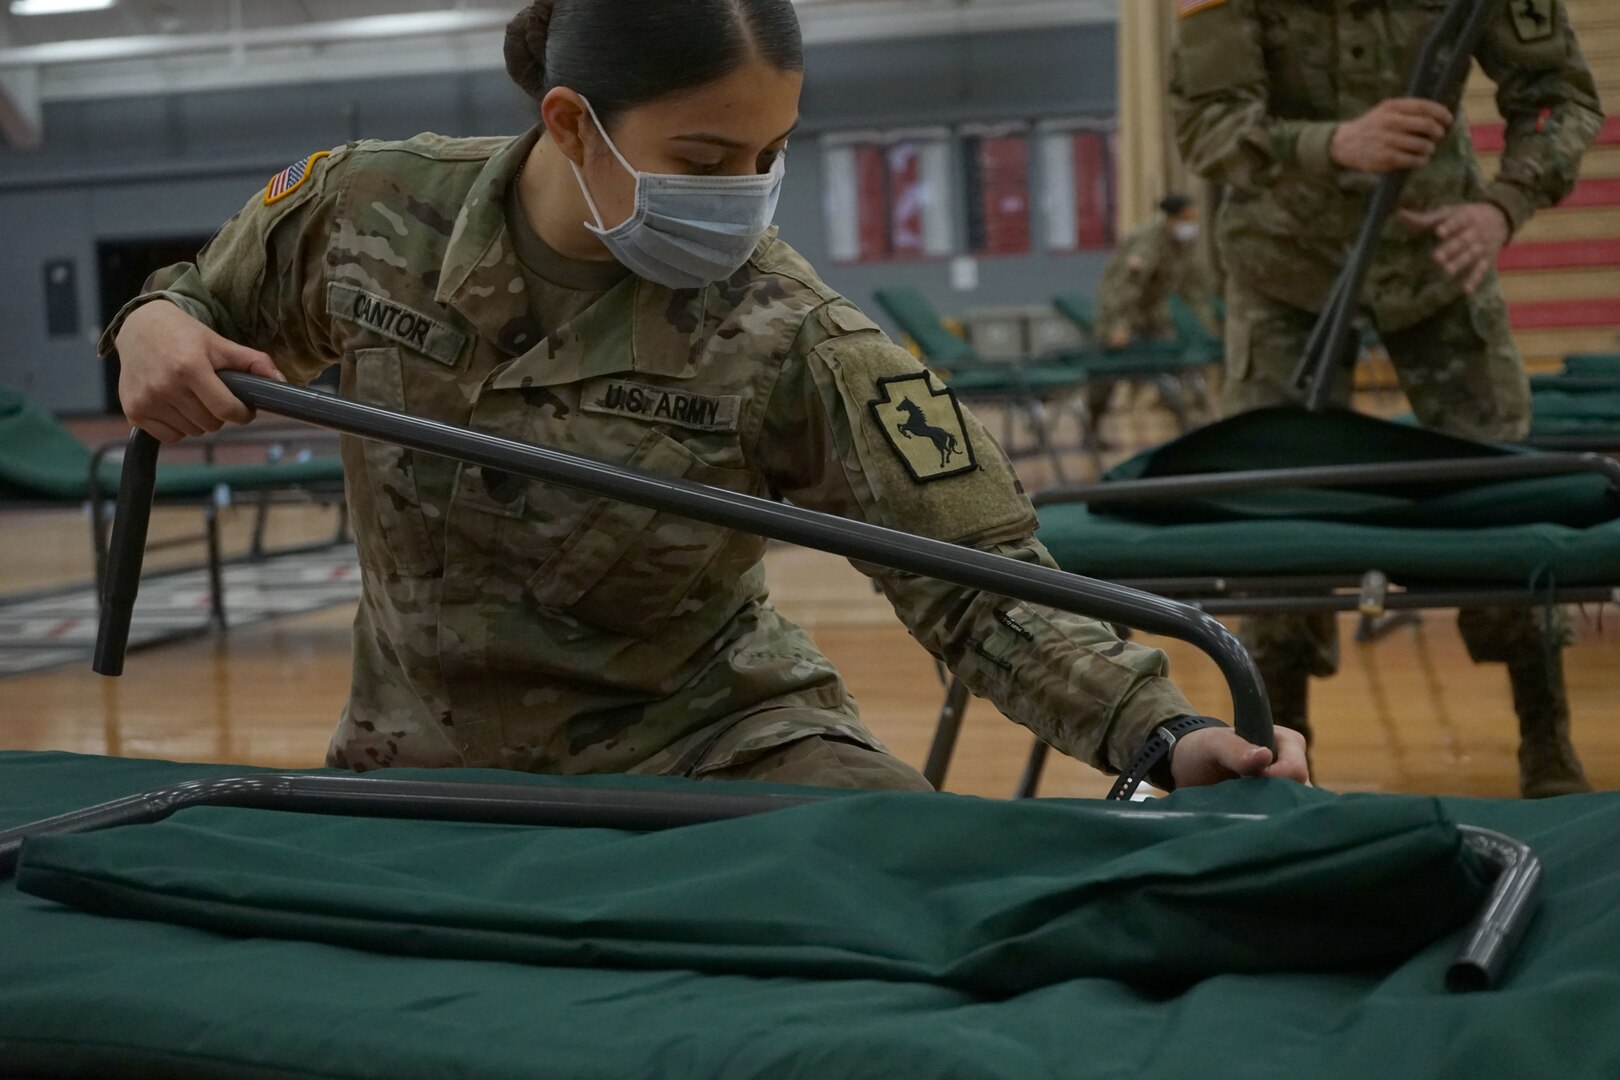 A Soldier from the Pennsylvania National Guard attaches the handrail of a cot during set up of an alternate care site at East Stroudsburg University's Koehler Fieldhouse, East Stroudsburg, Pa., April 14, 2020.